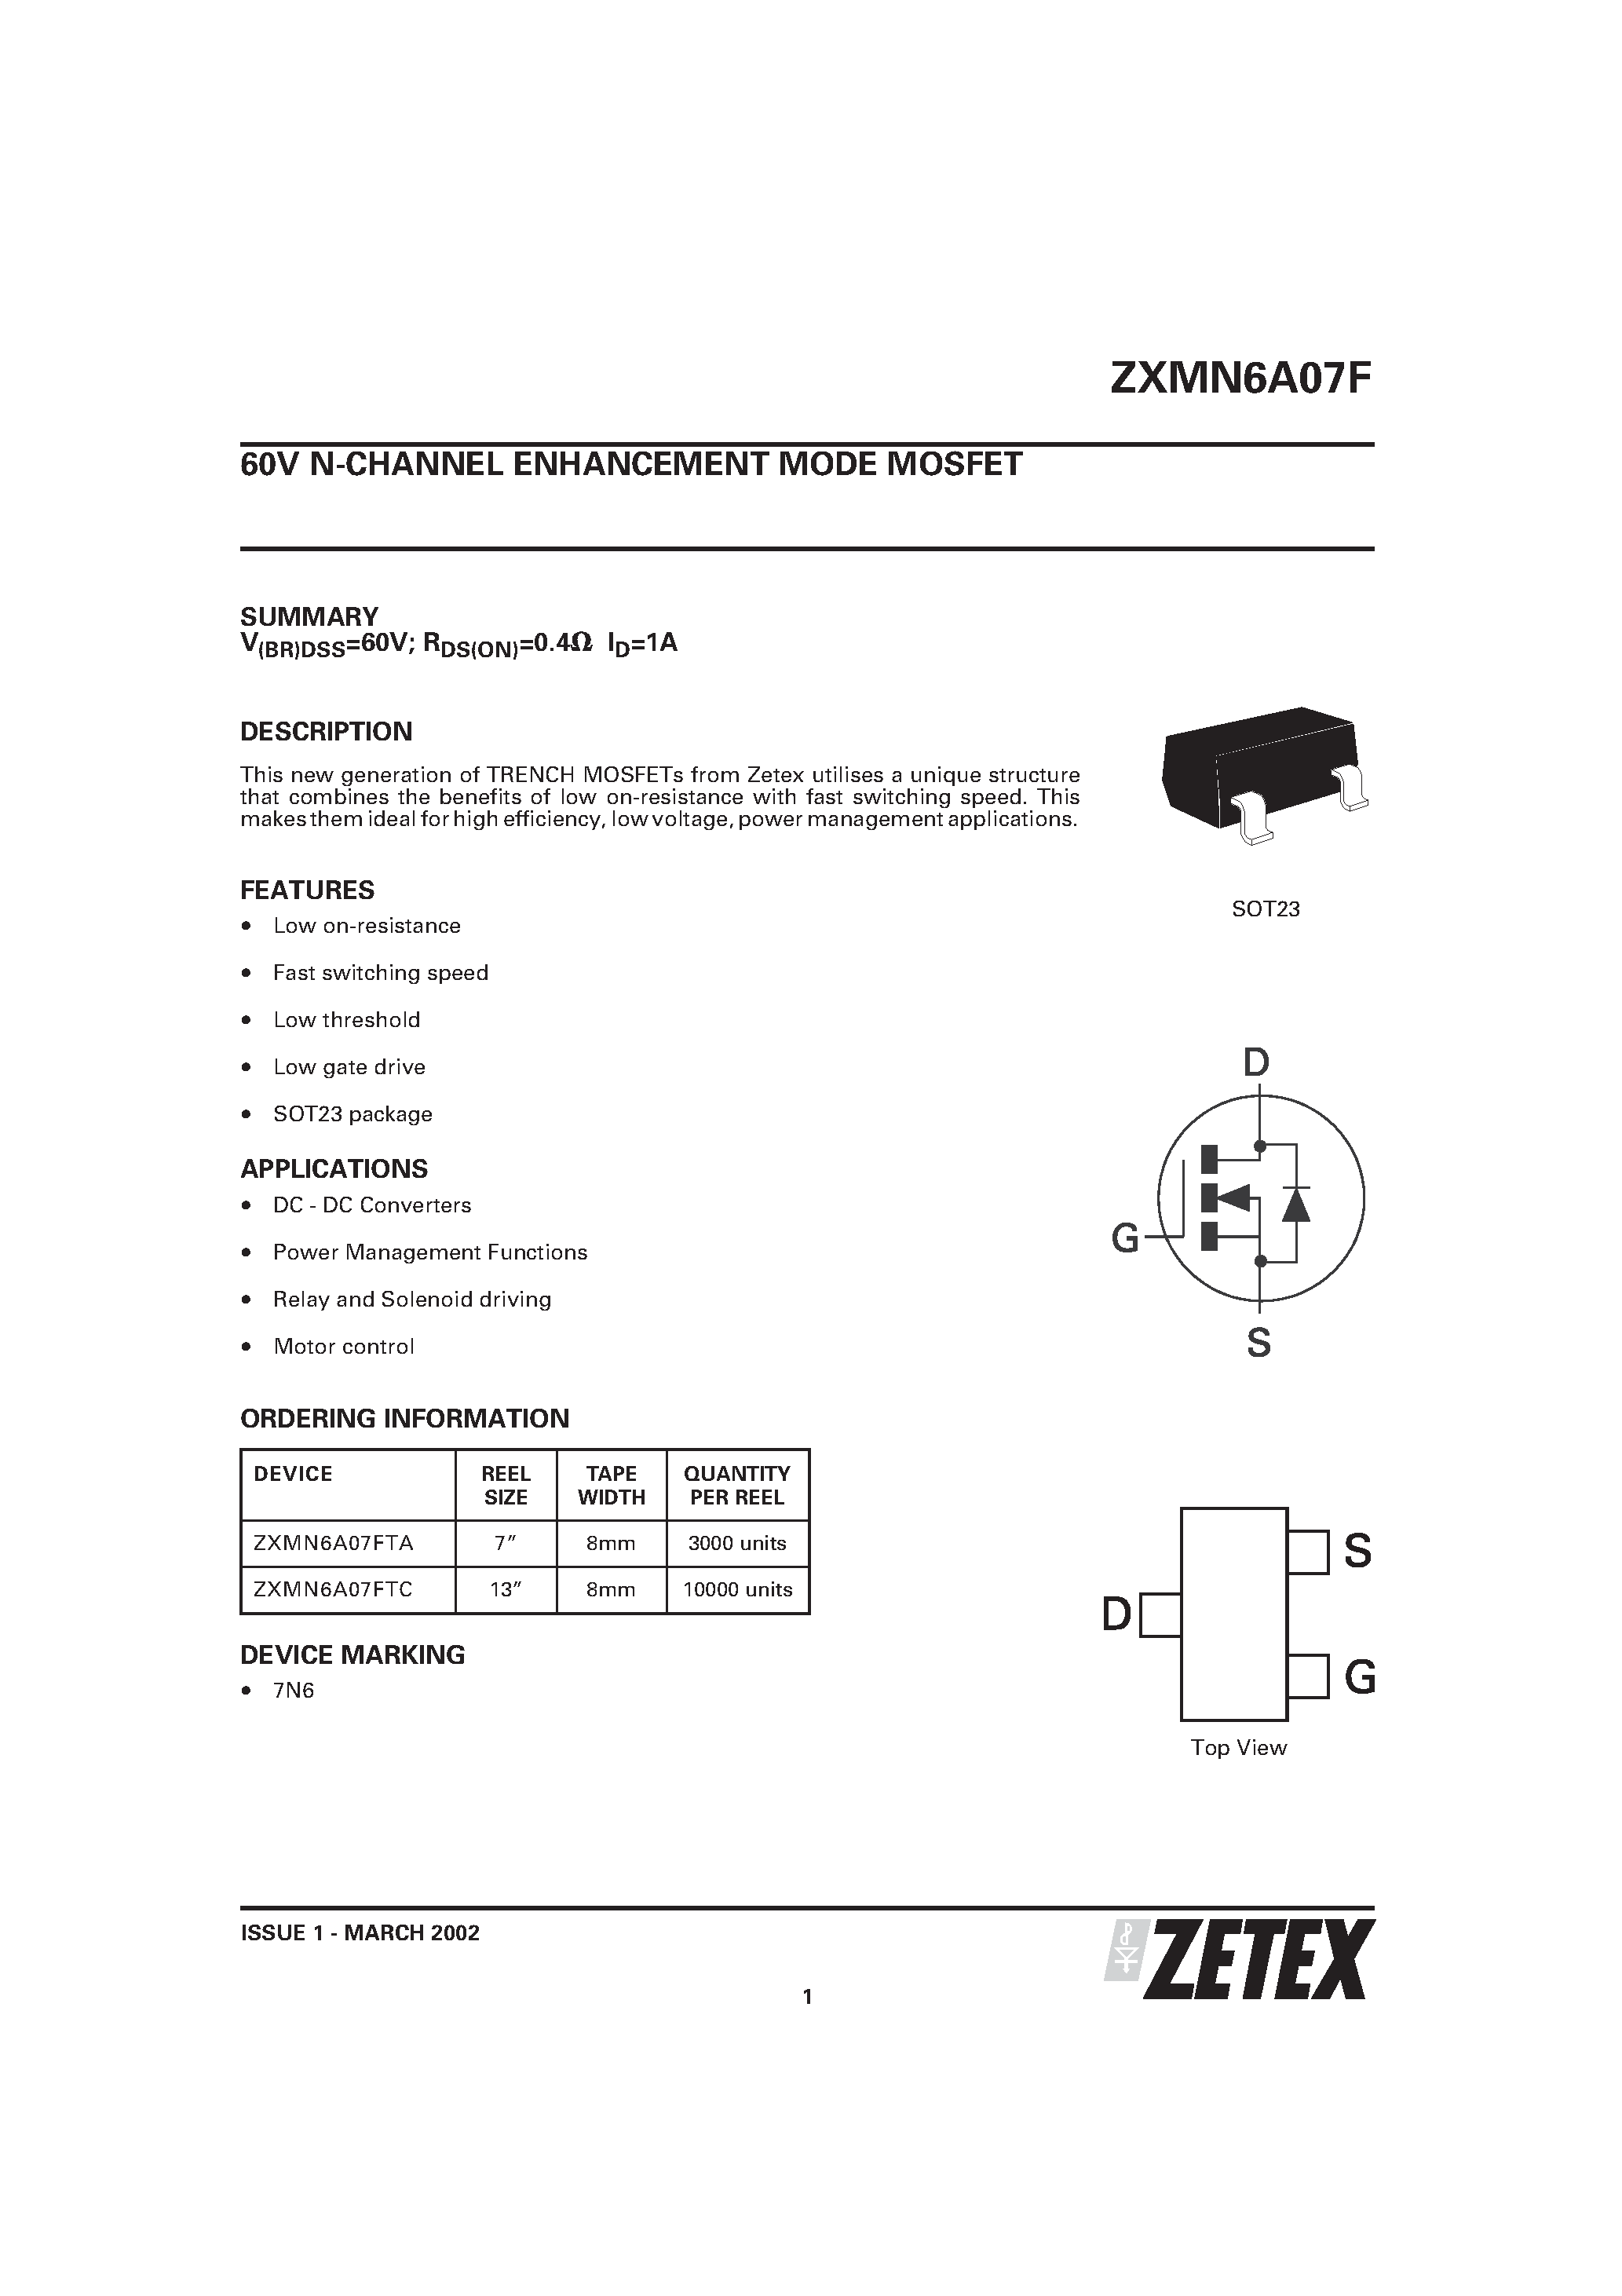 Datasheet ZXMN6A07F - 60V N-CHANNEL ENHANCEMENT MODE MOSFET page 1